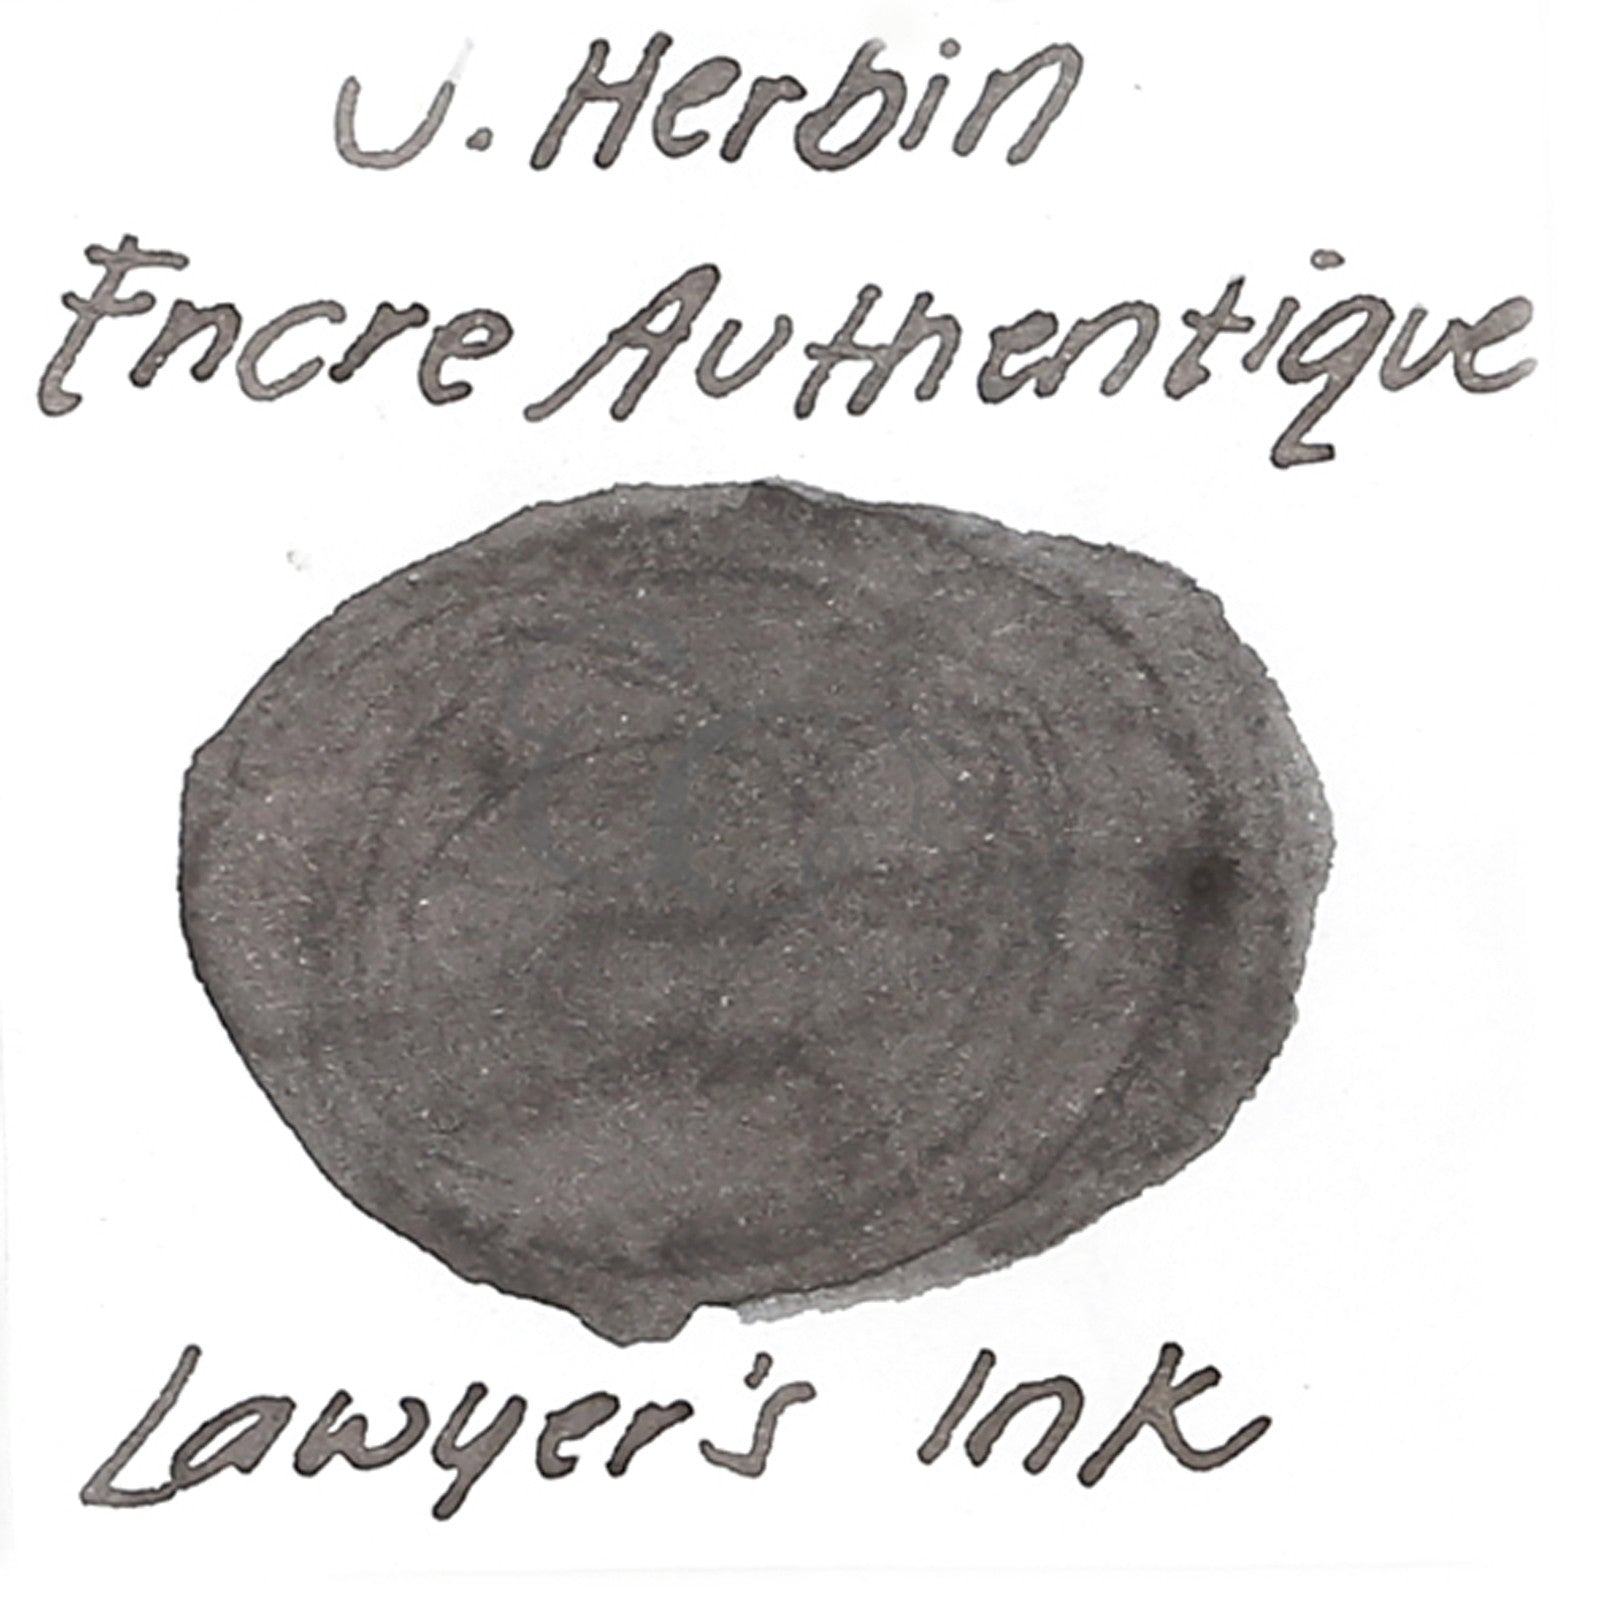 J. Herbin Authentic Lawyer's Ink